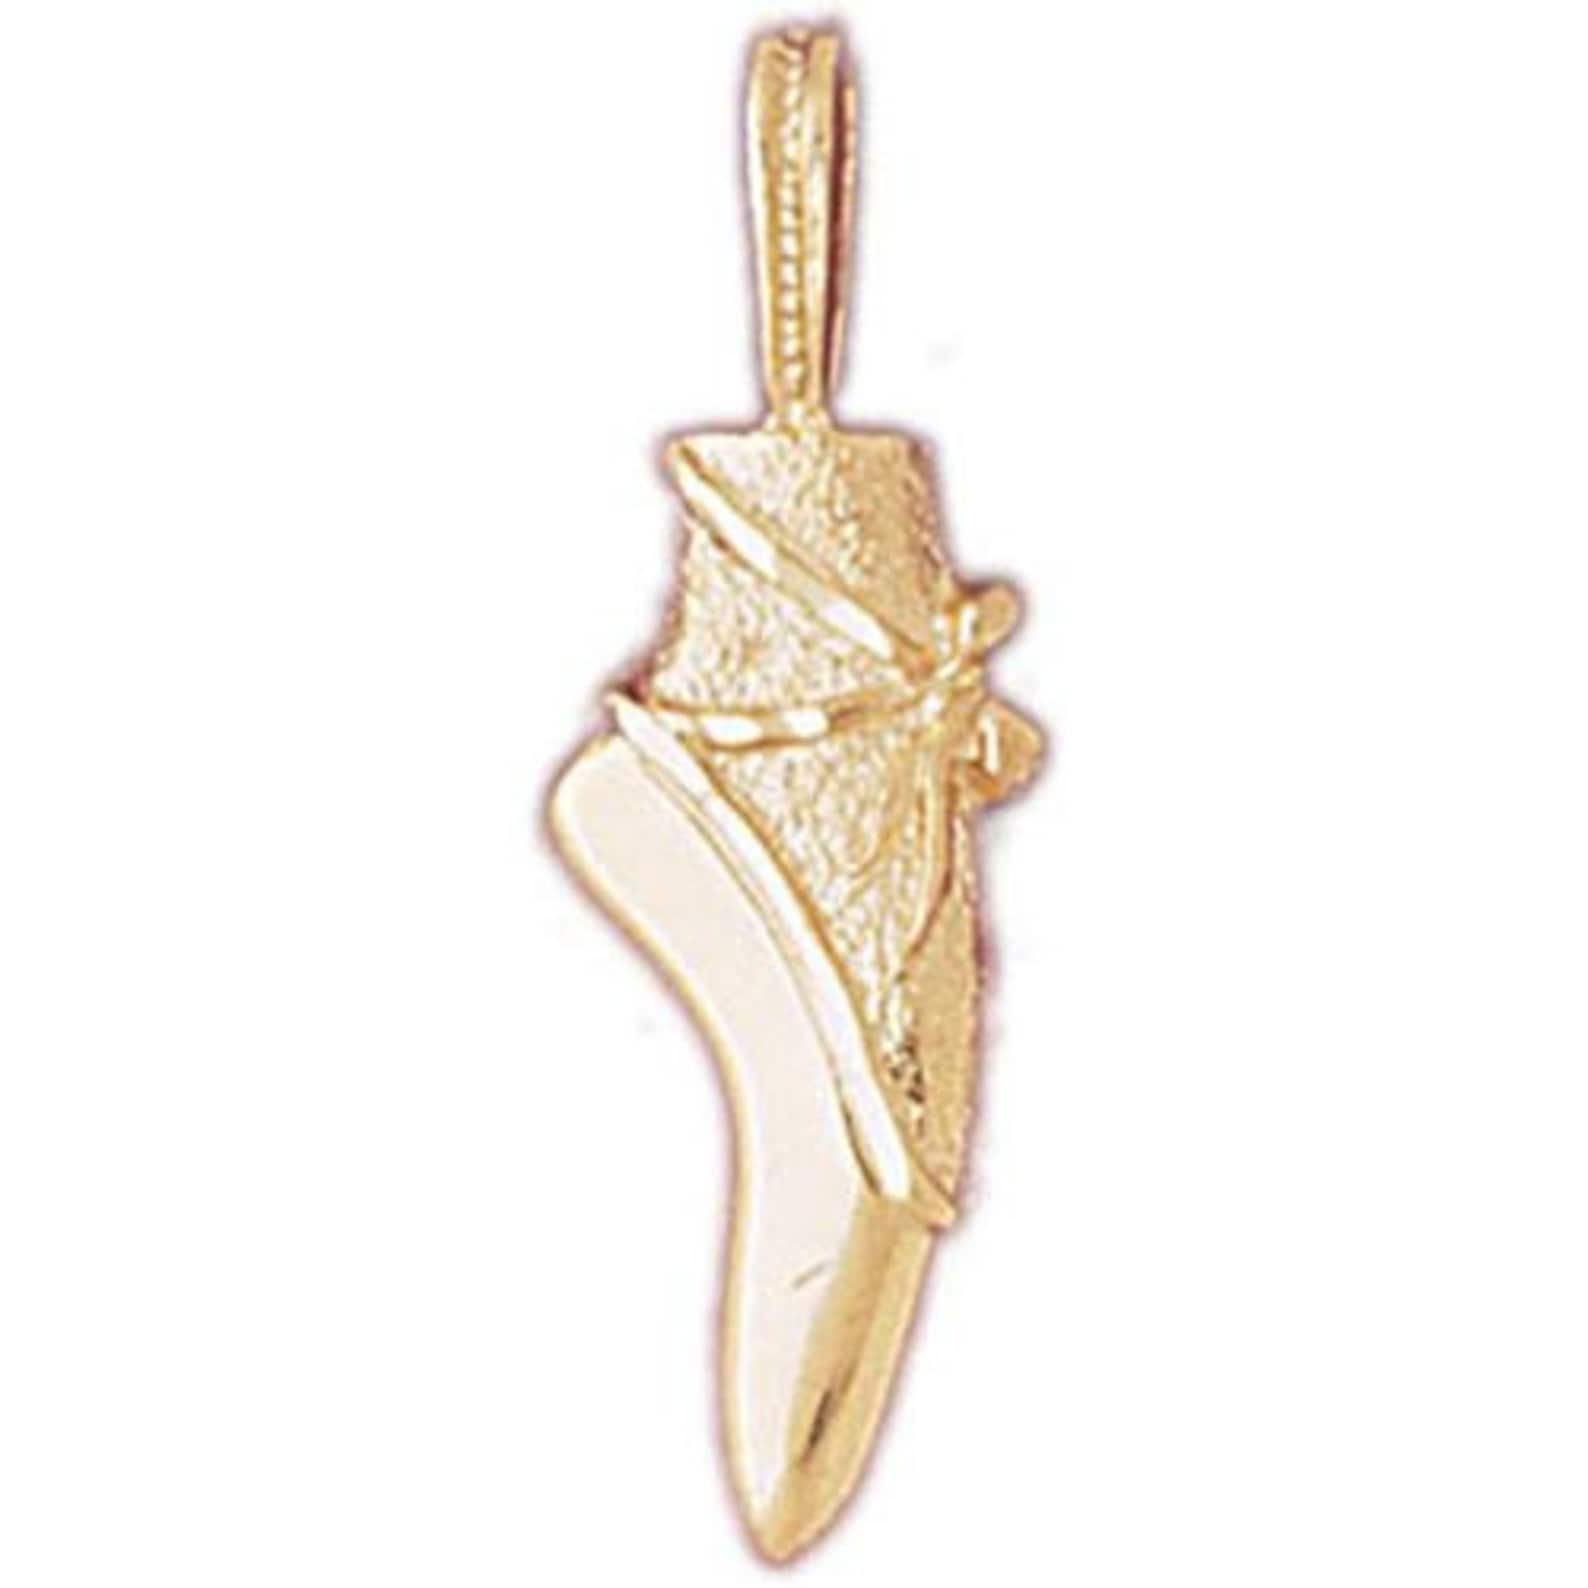 ballet shoes jewelry, 14kt gold pendant, any occasion gift,wedding gift,holiday gift,memorable gift,gold charm,can engrave text.